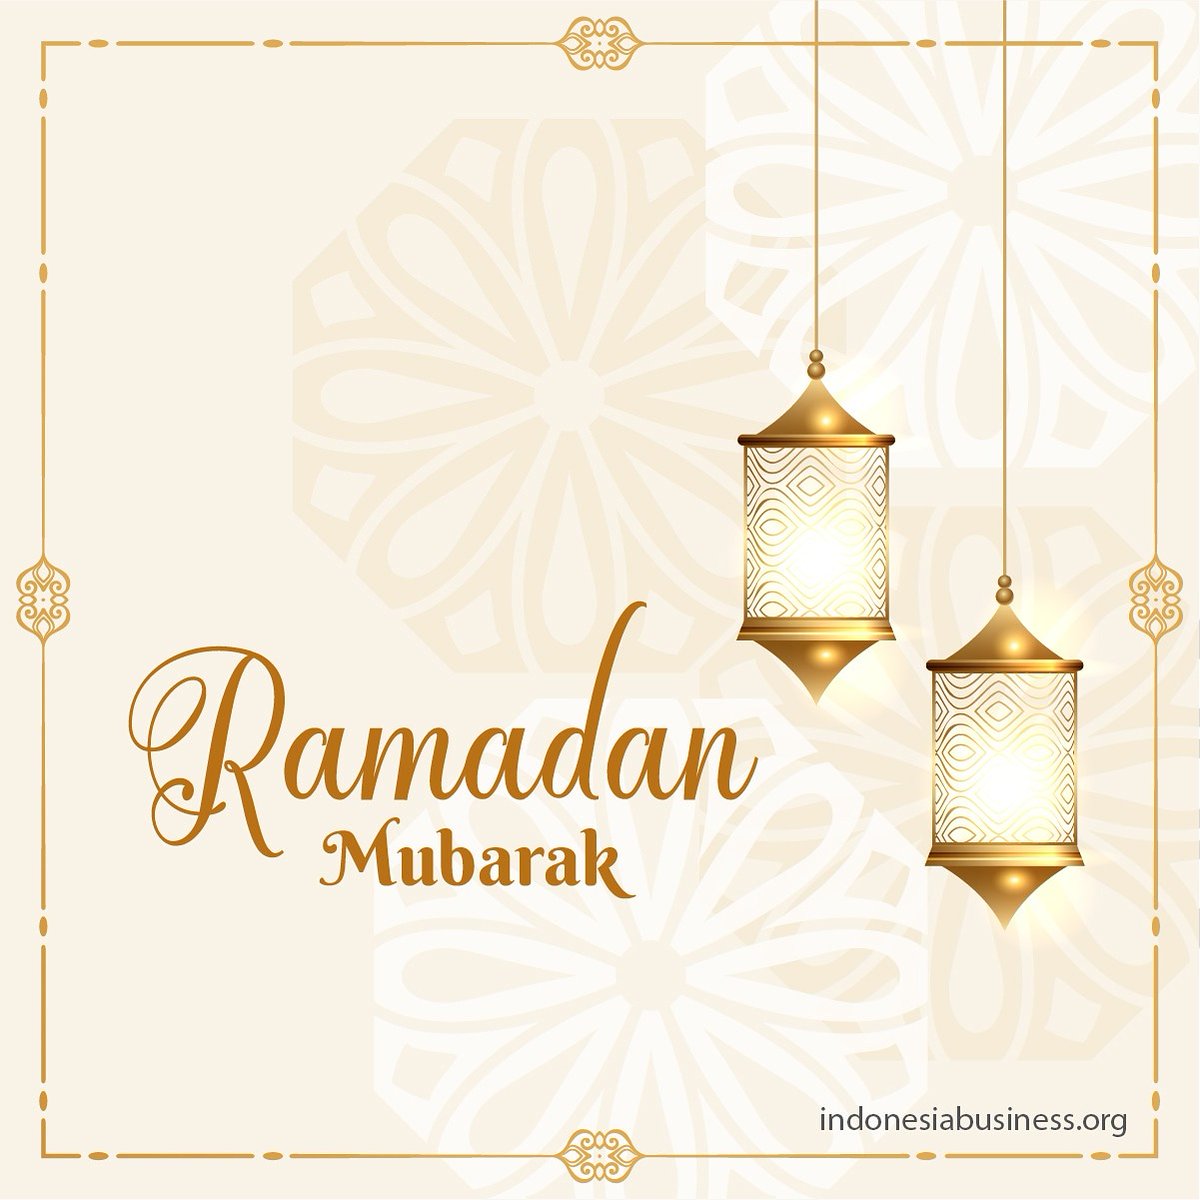 Ramadan Mubarak! May this holy month bring peace all over the world and wish you all a blessed Ramadan. 

#ebscentreglobal
#indonesiabusiness
#investinindonesia
#ramadan #ramadan2021